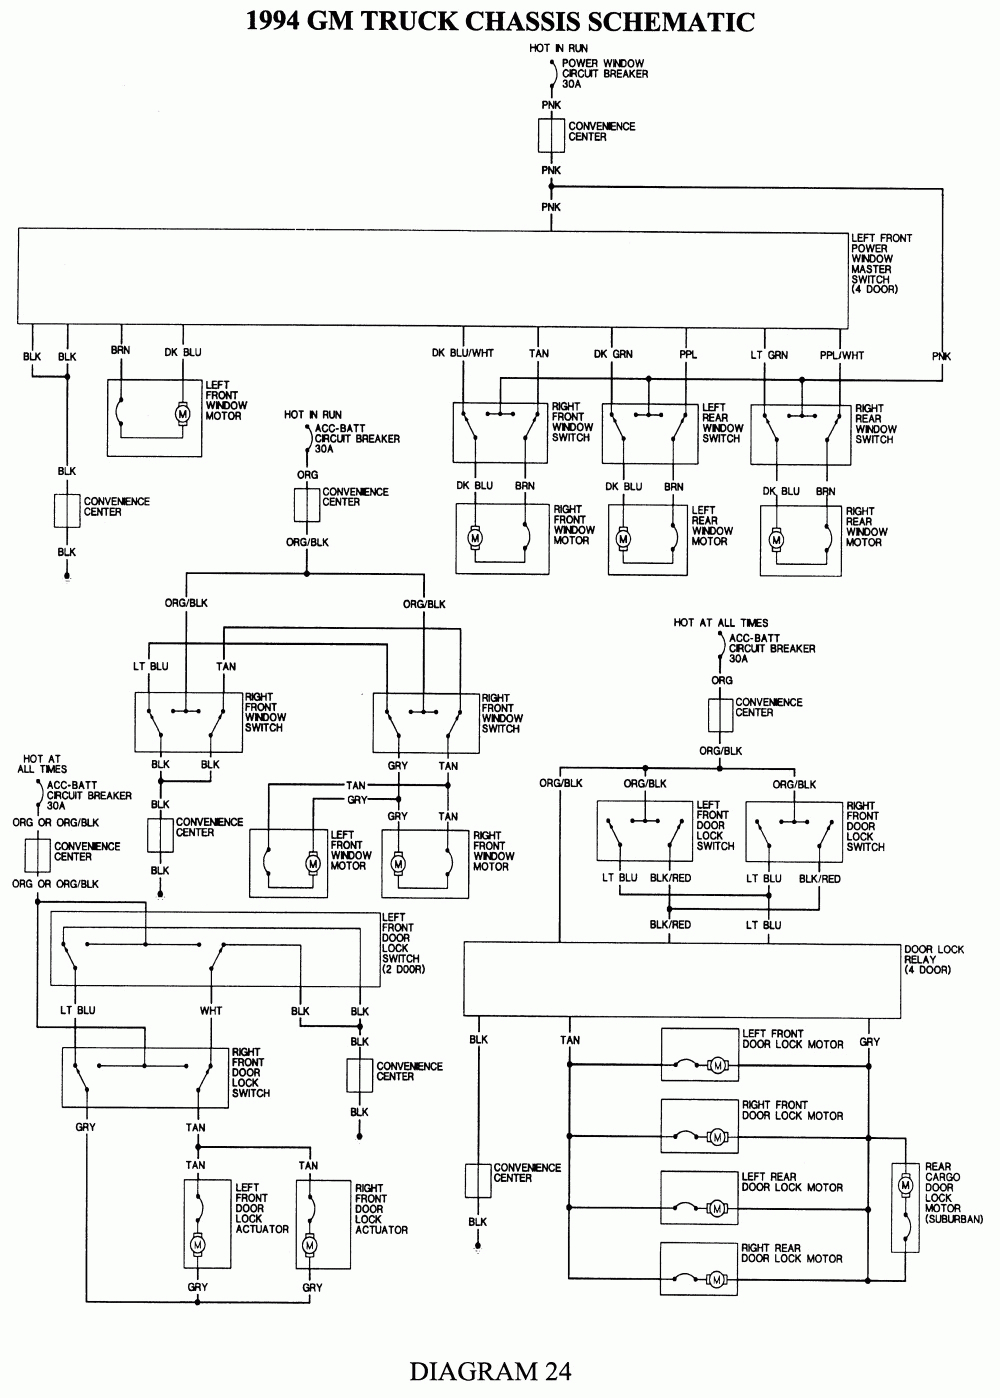 2000 Chevy K1500 Wiring Diagram 4Wd | Wiring Library - Chevy 4Wd Actuator Upgrade Wiring Diagram